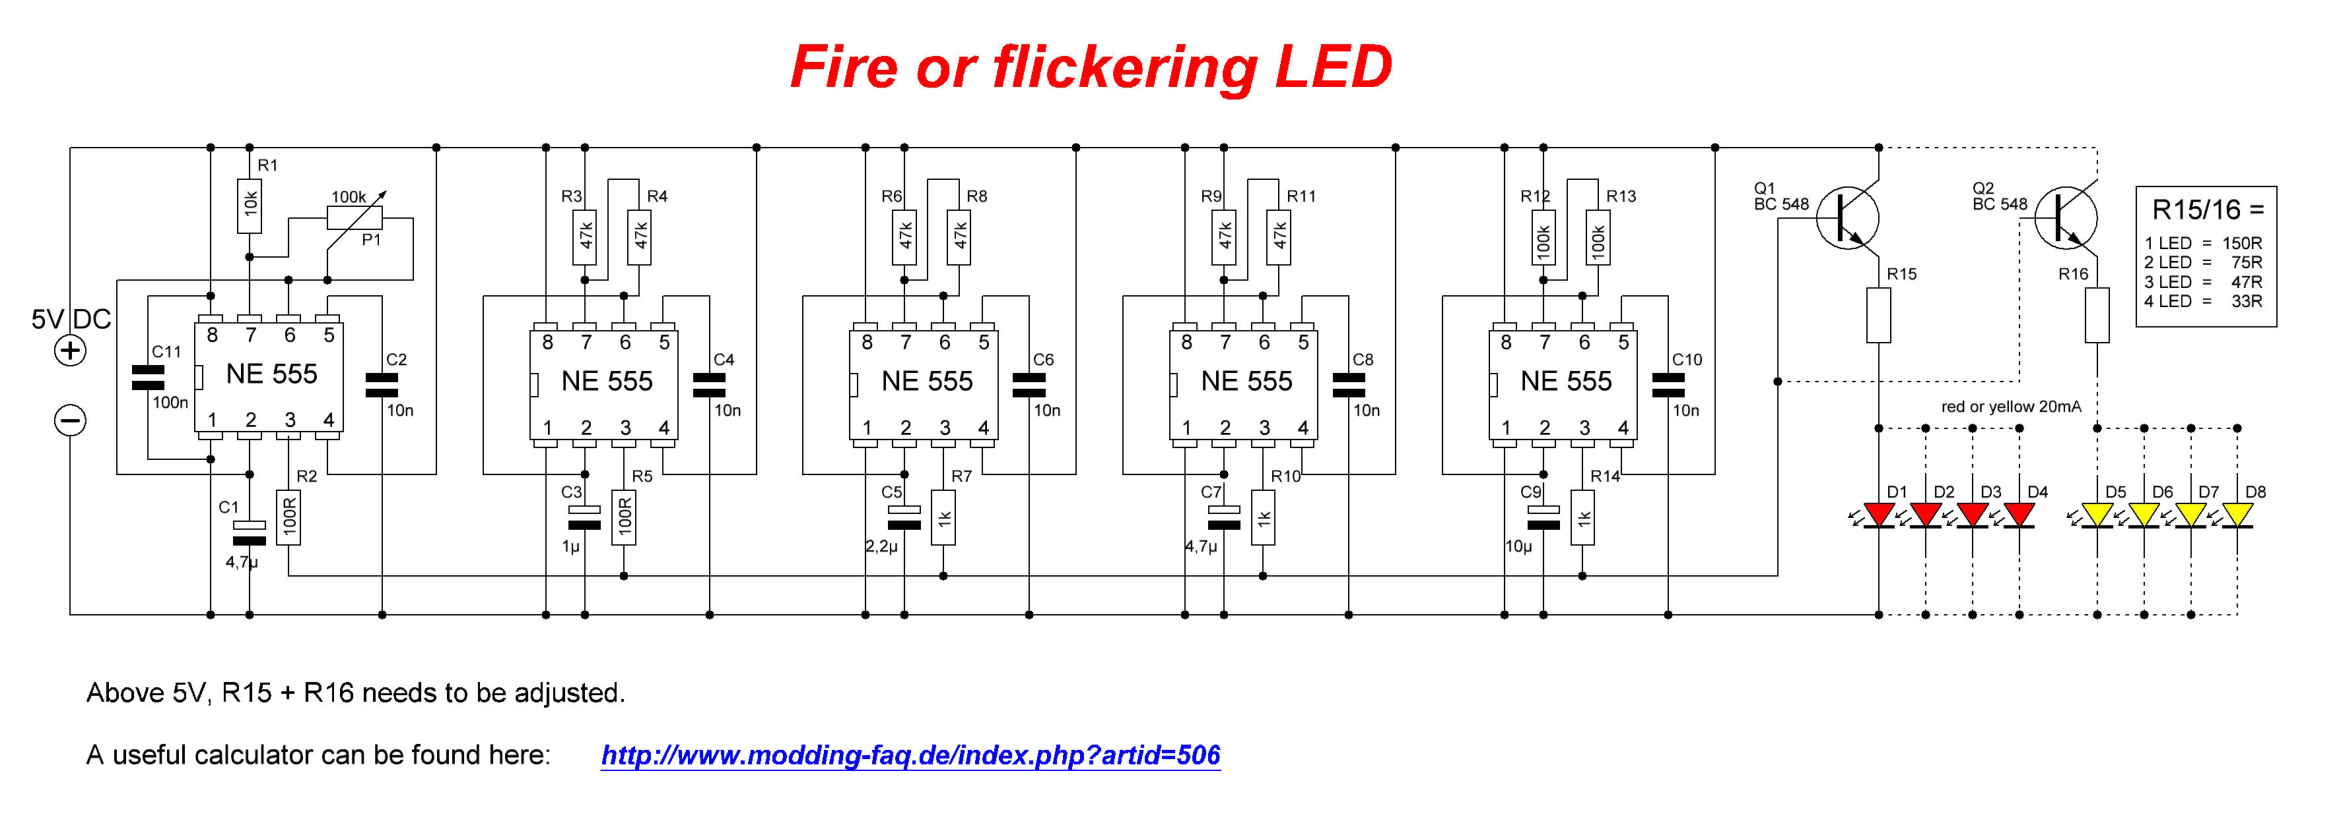 flickering_fire_LED-1-1.png